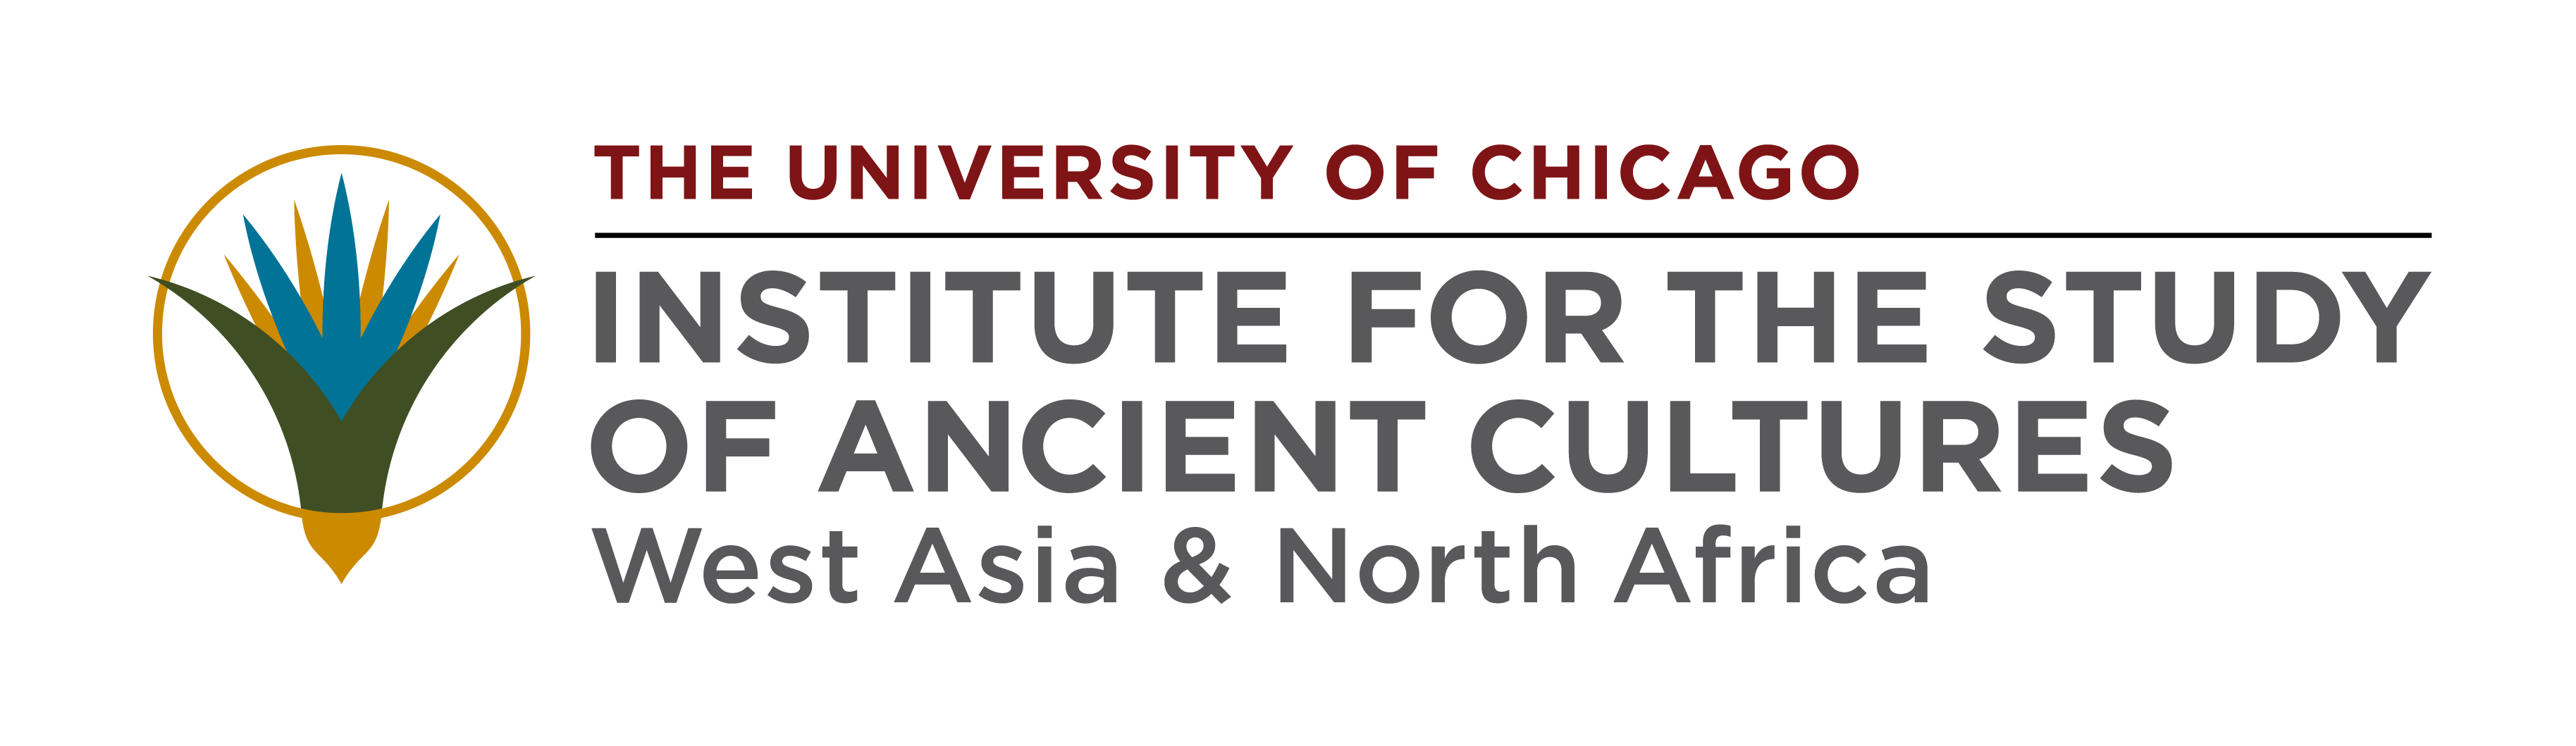 university of chicago campus visits